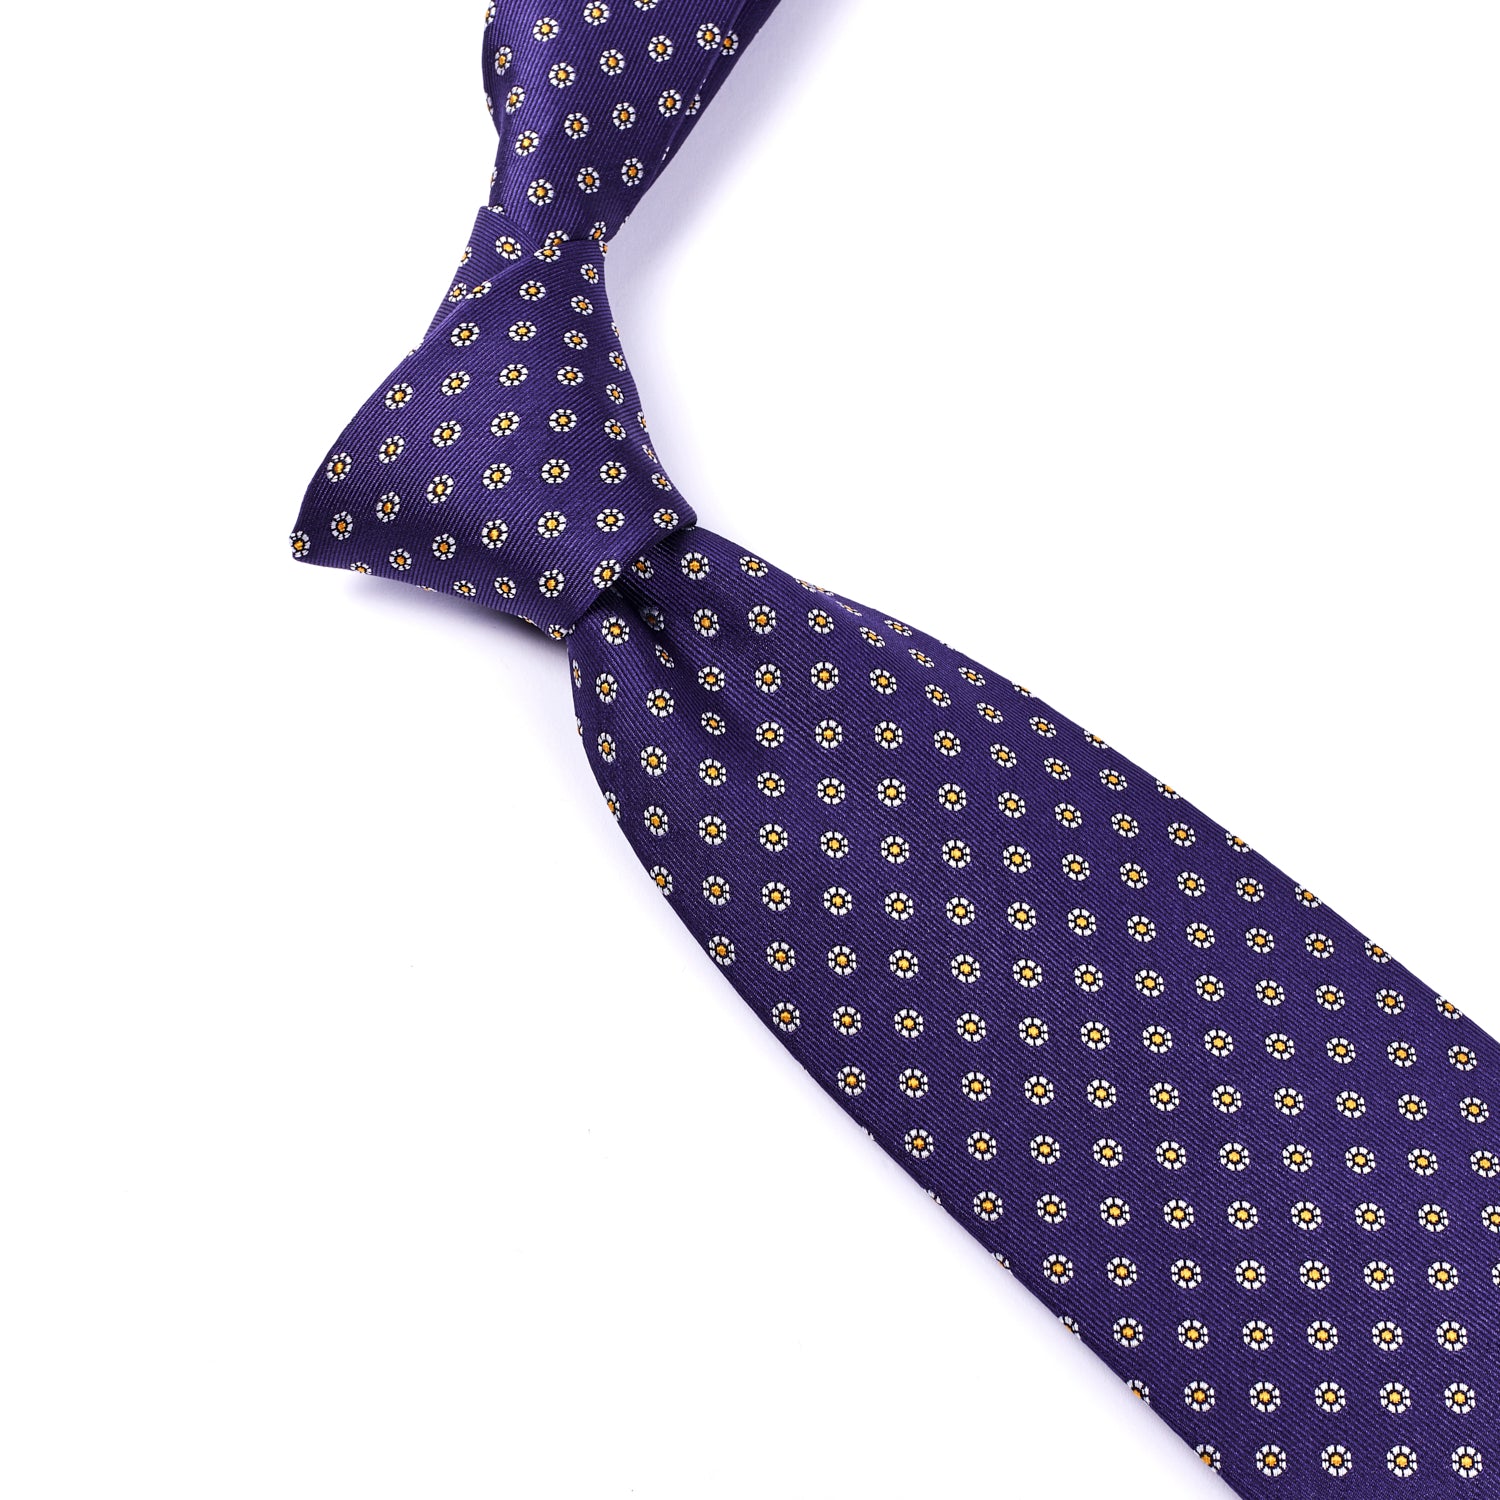 A Sovereign Grade Plum Floral Jacquard Tie with gold dots on a white background from KirbyAllison.com.